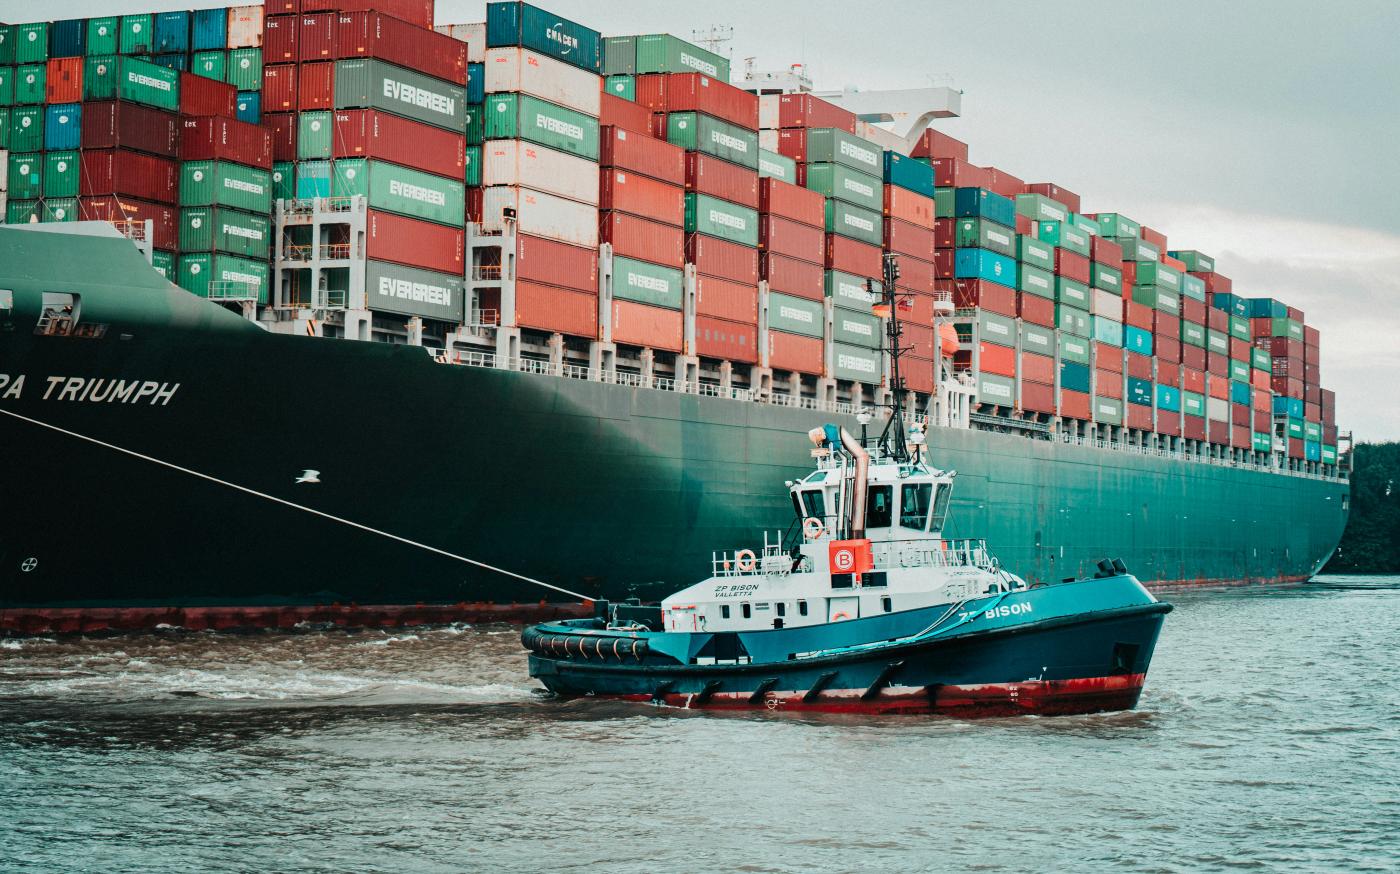 a tug boat pulling a large container ship by Mika Baumeister courtesy of Unsplash.